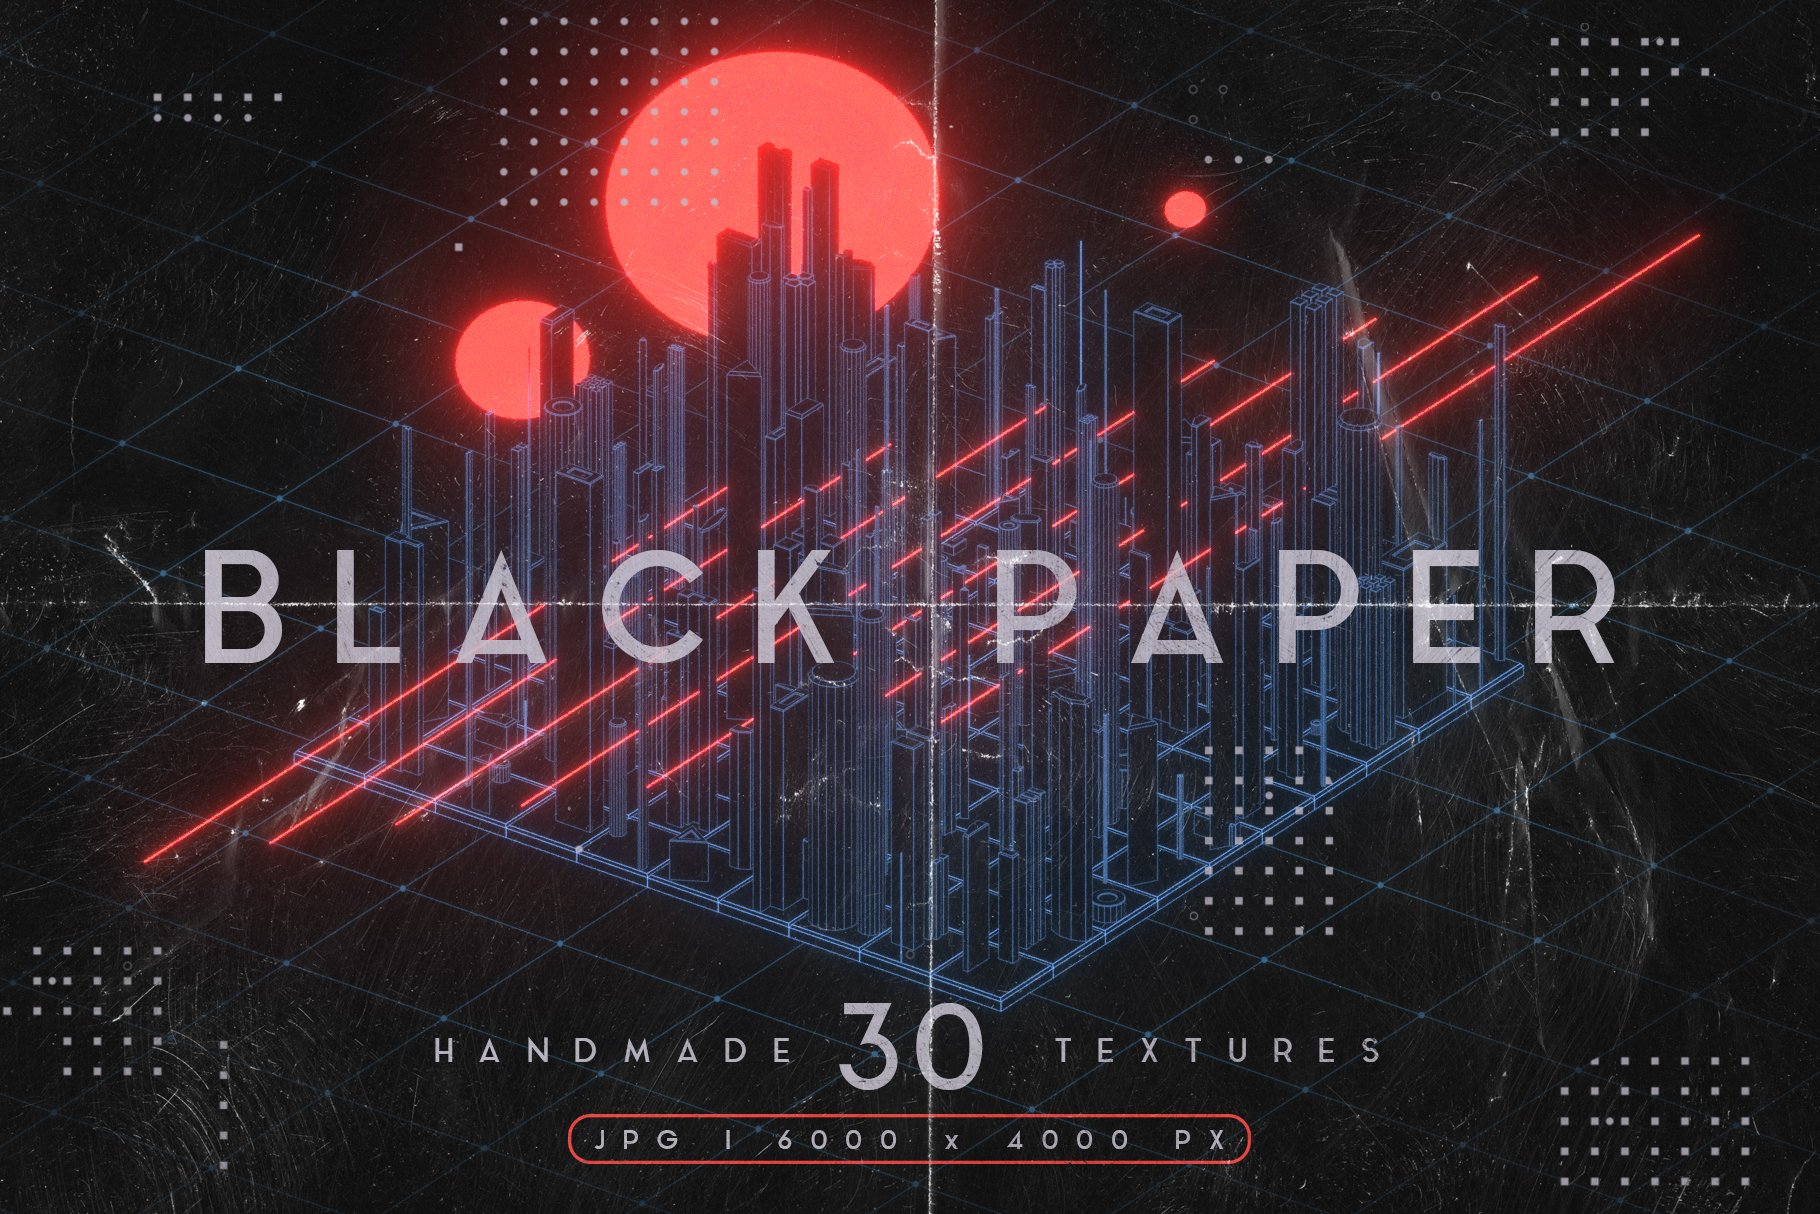 Black Paper Textures cover image.